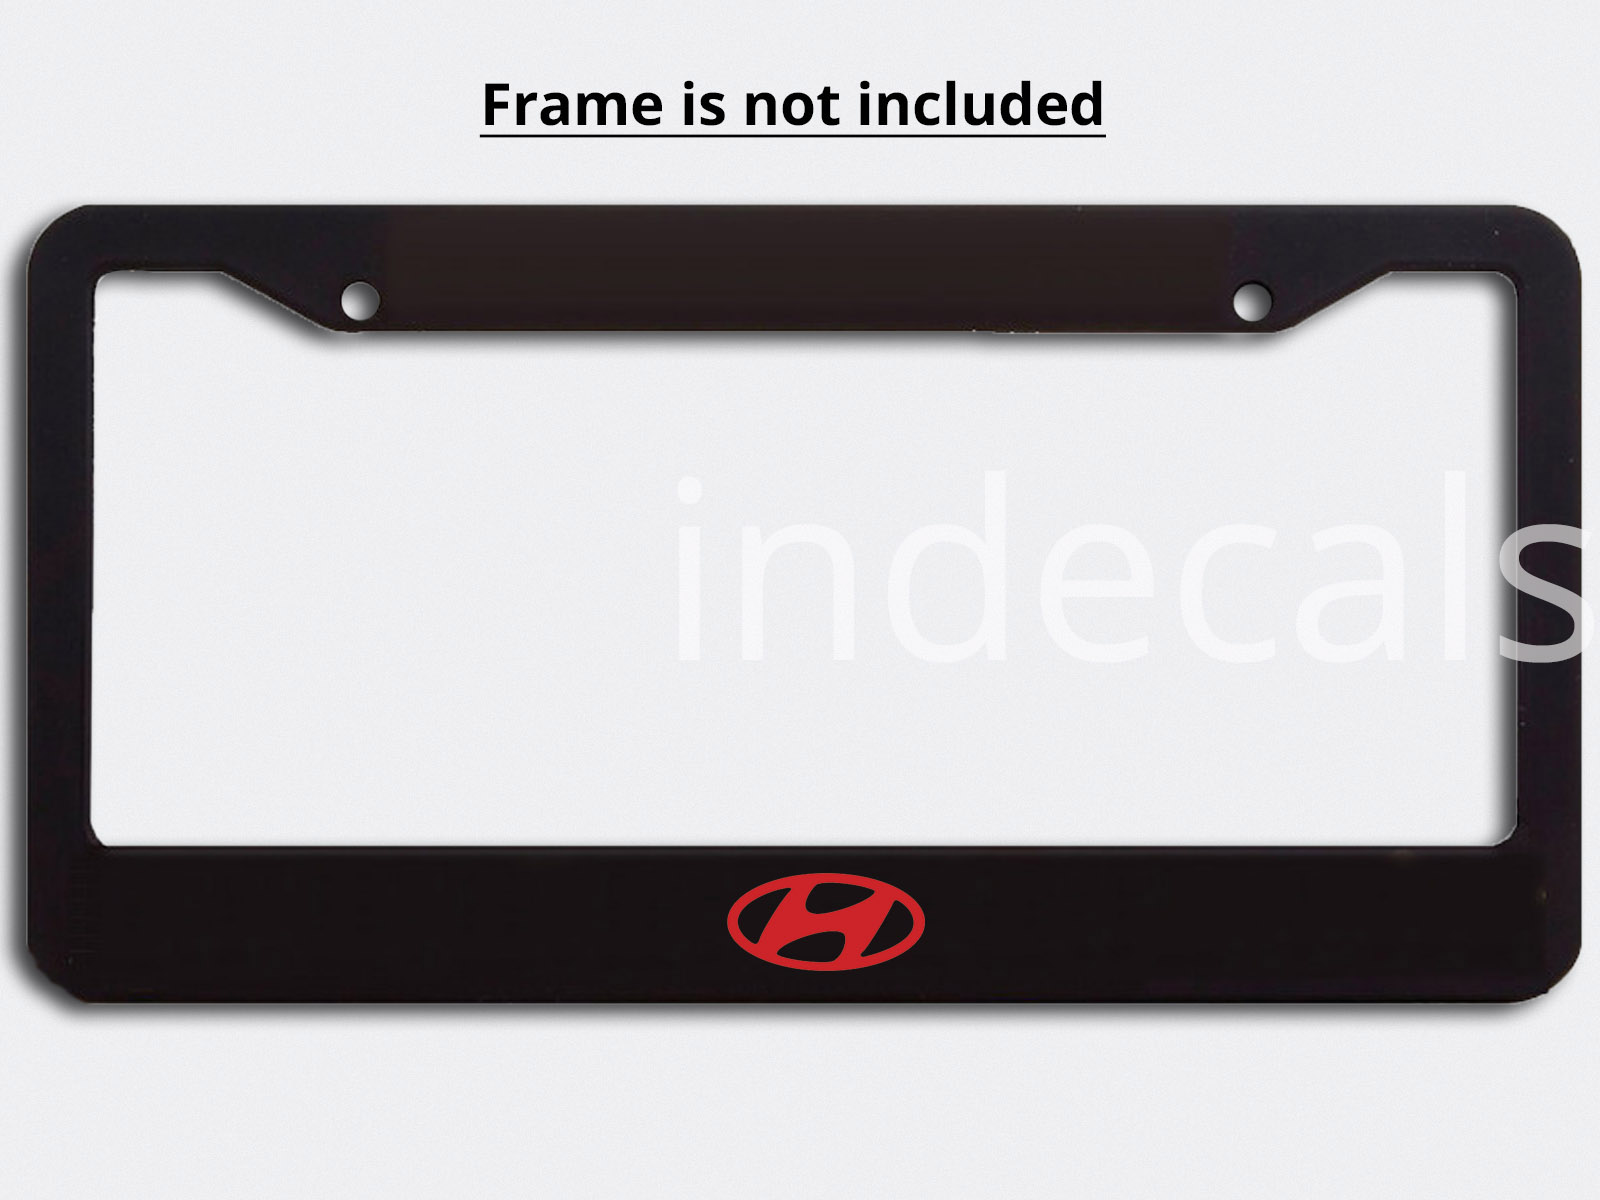 3 x Hyundai Stickers for License Plate Frame - Red